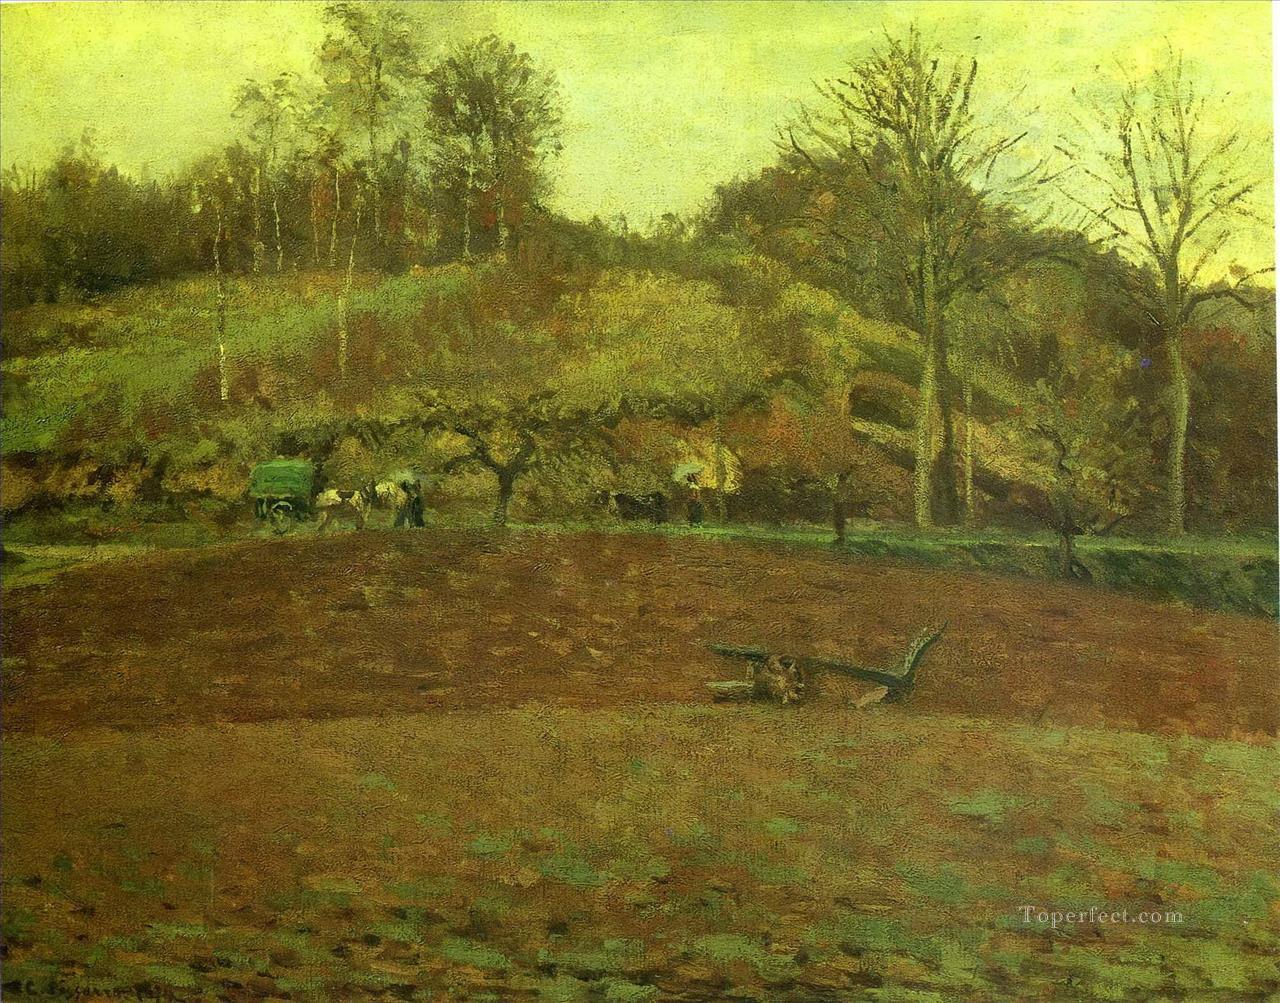 ploughland 1874 Camille Pissarro scenery Oil Paintings